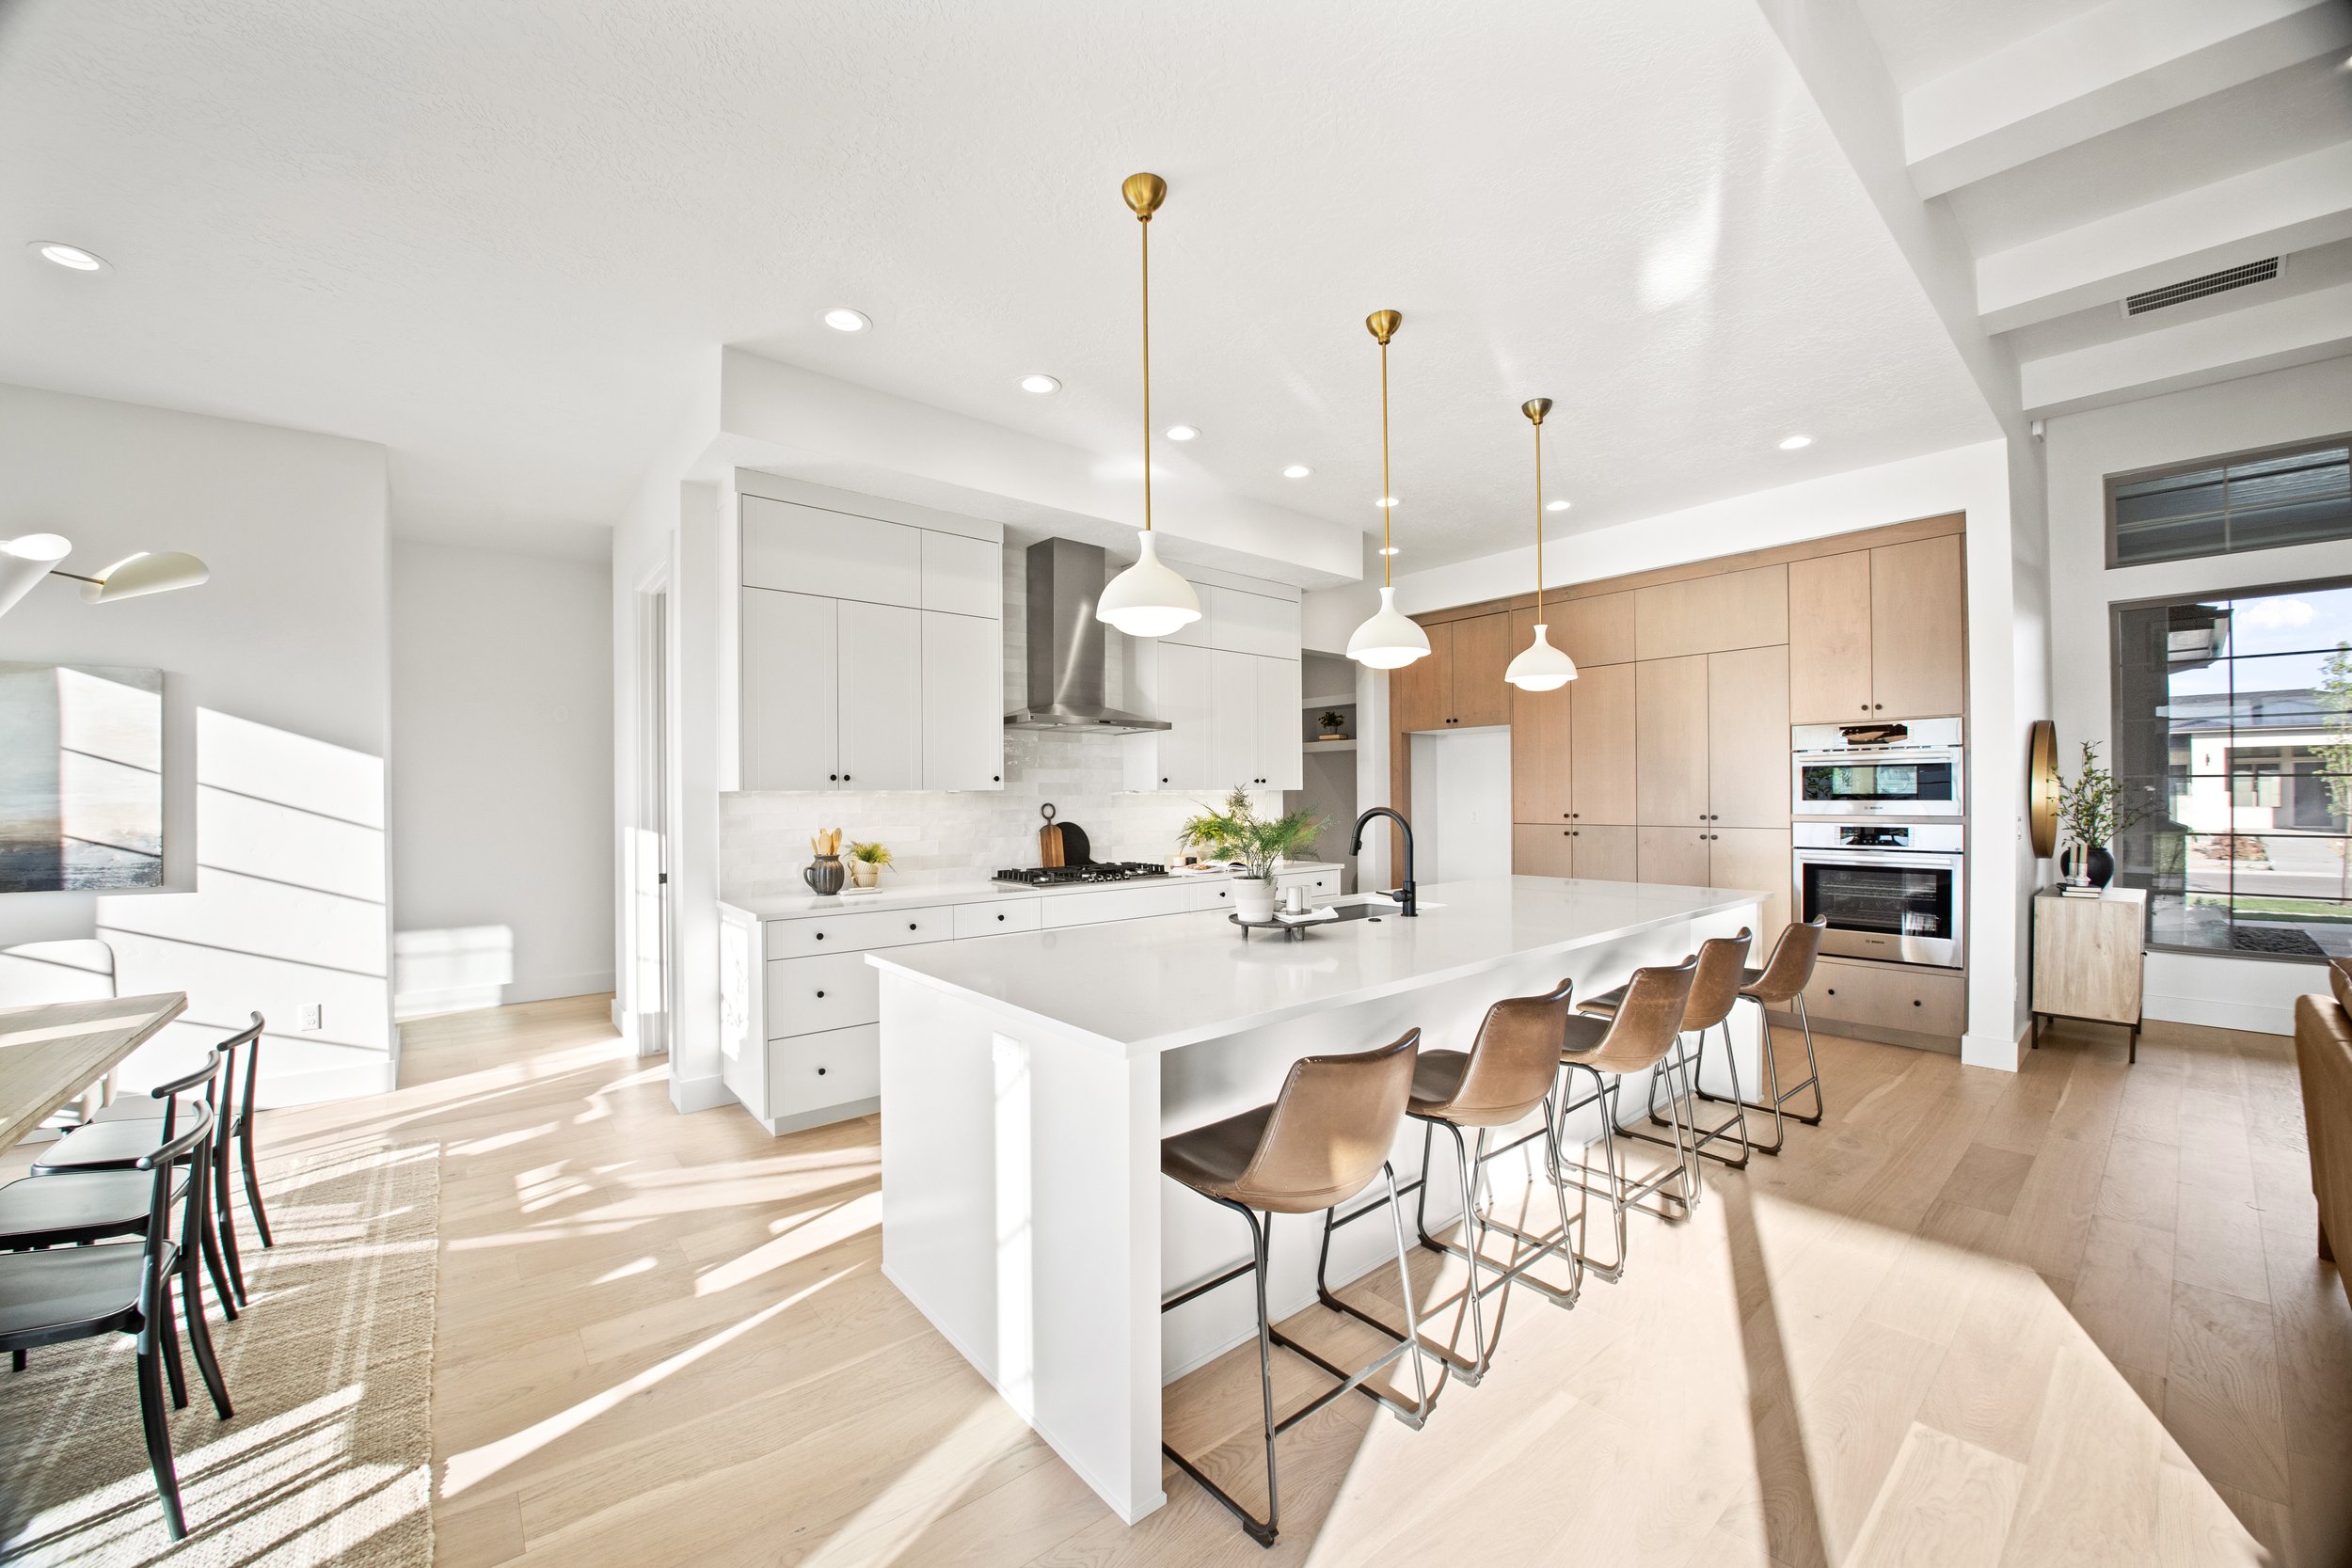  NEW CONSTRUCTION, NEW KITCHEN, NEW HOME, BRIGHT KITCHEN, LIGHT KITCHEN, DREAM KITCHEN 